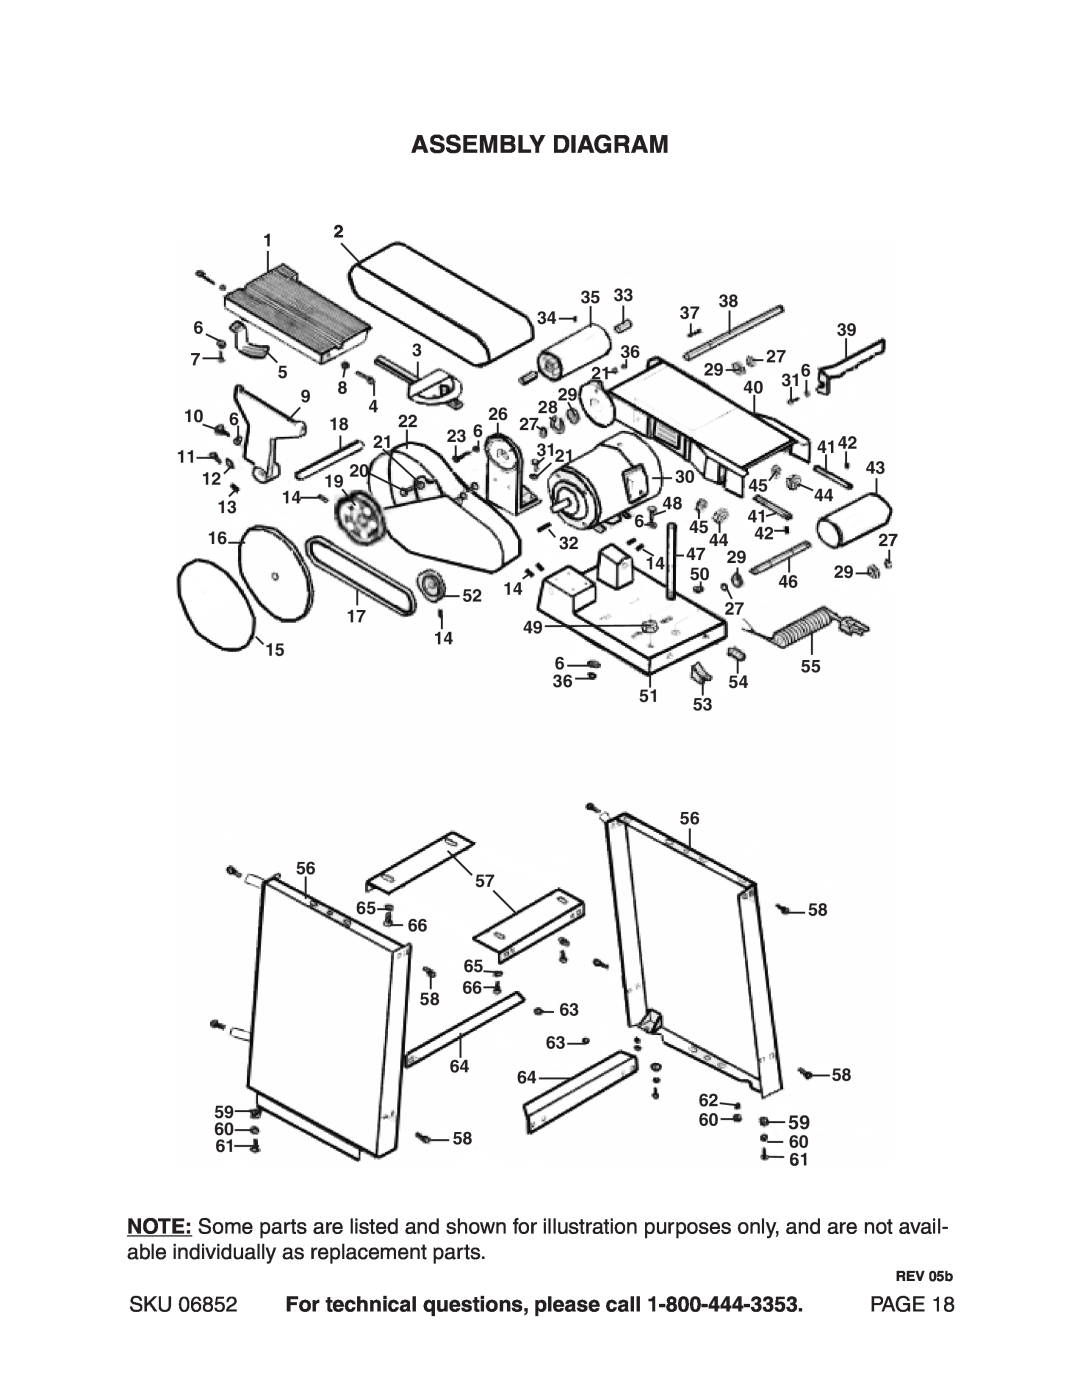 Harbor Freight Tools 6852 operating instructions Assembly Diagram, For technical questions, please call, Page, REV 05b 